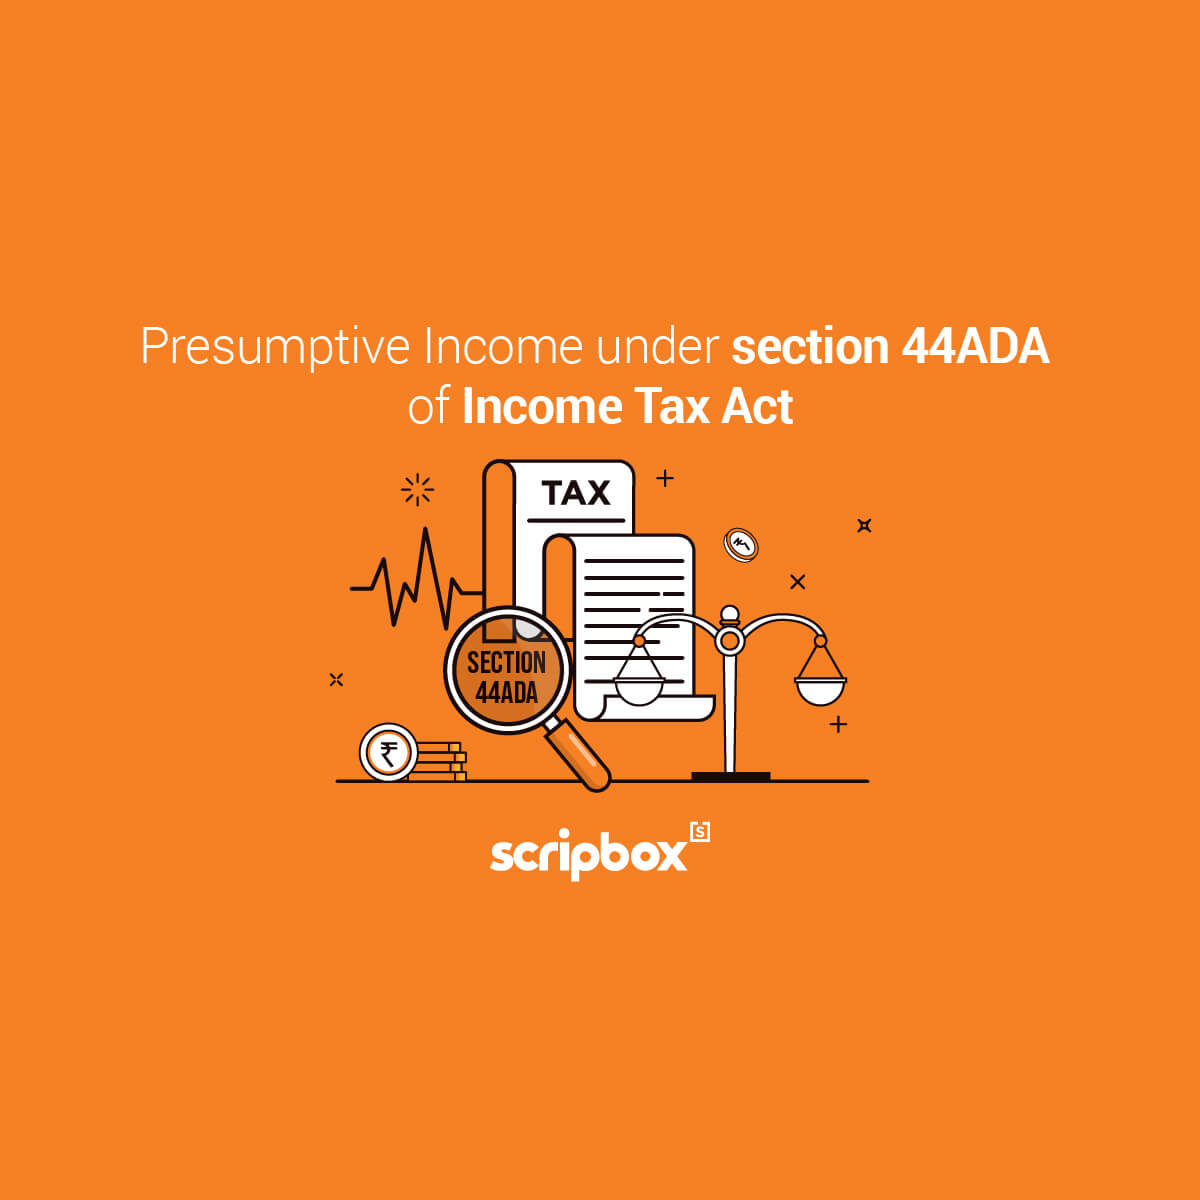 section-44ada-of-income-tax-act-presumptive-scheme-for-professionals